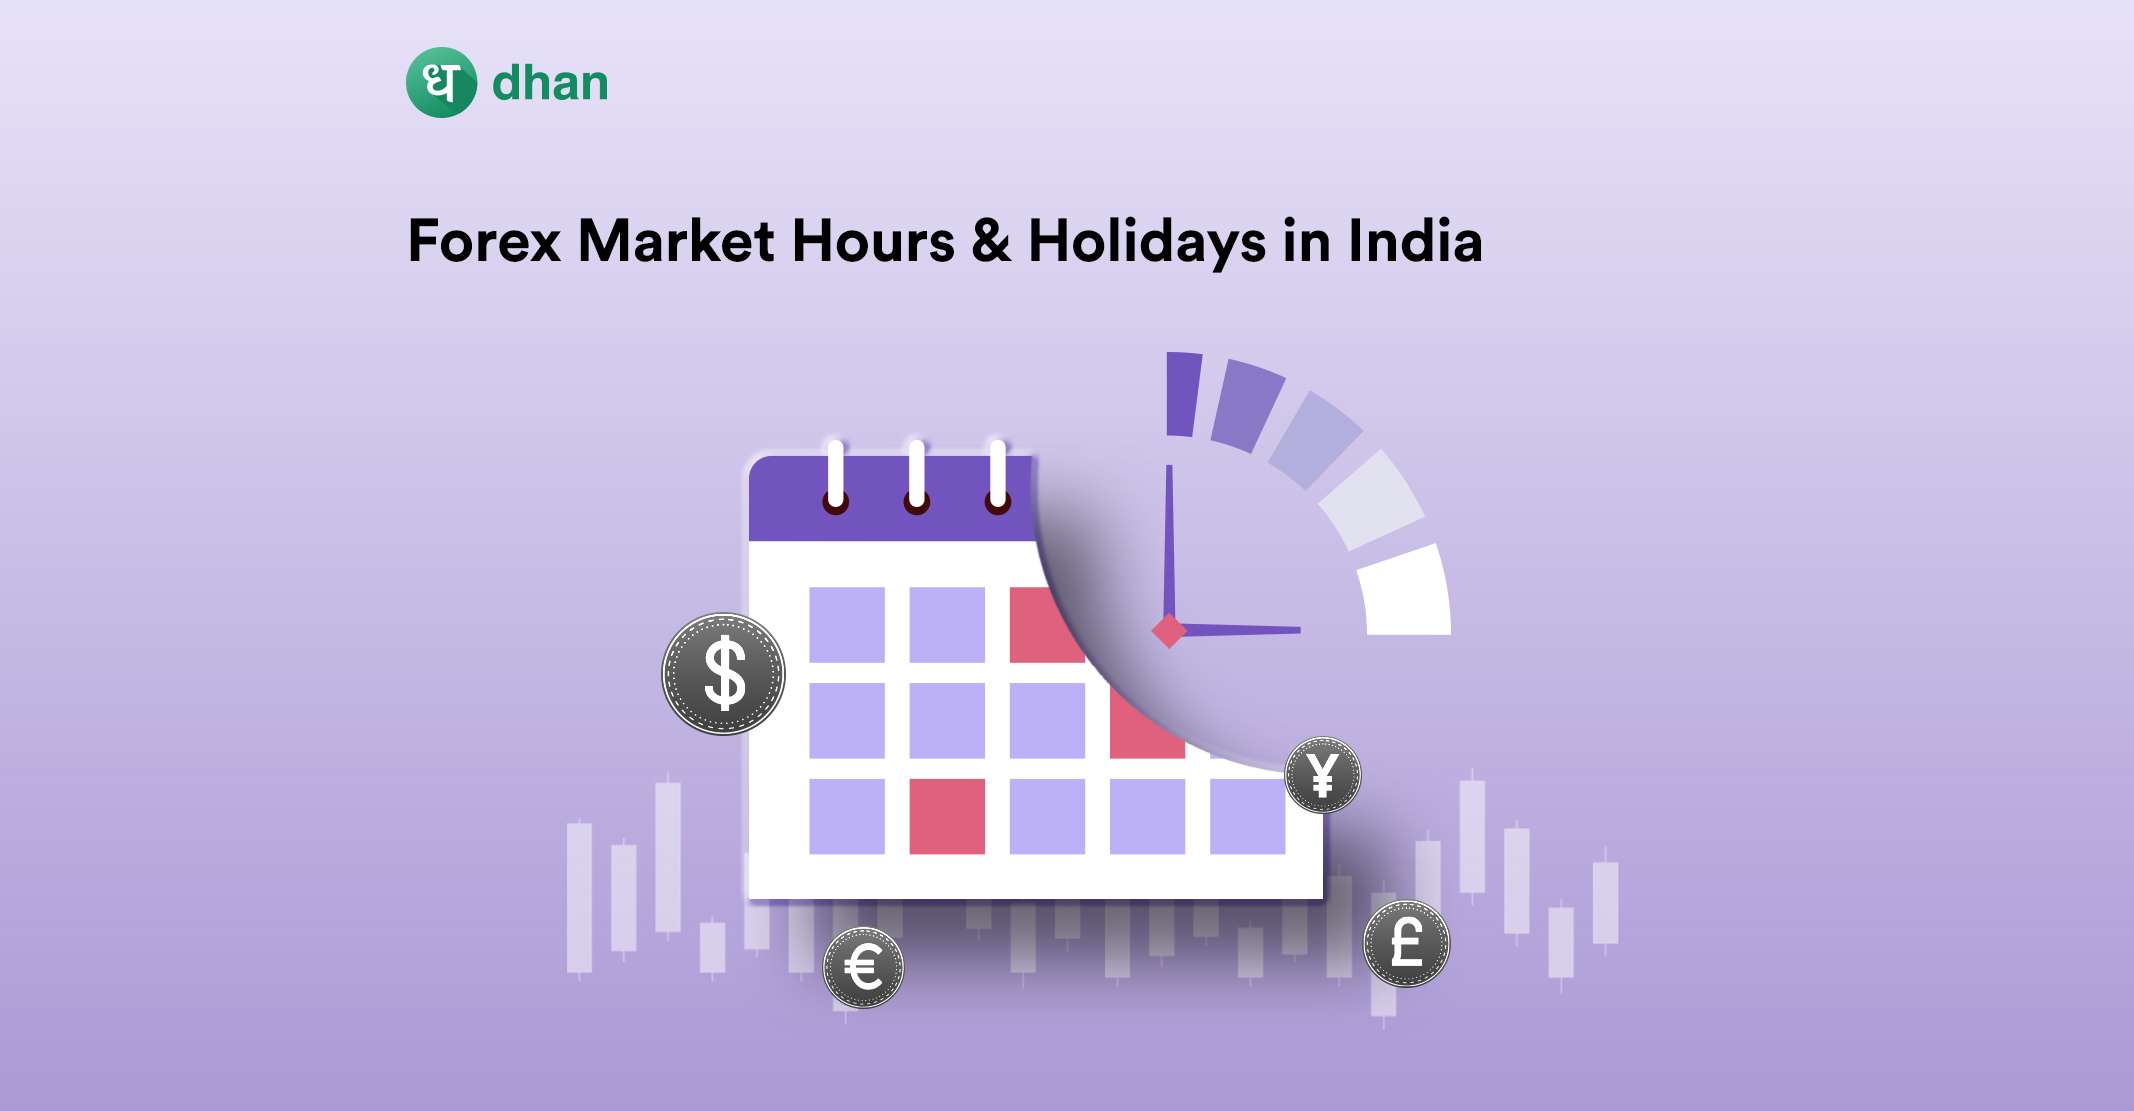 Forex Market Hours & Holidays in India